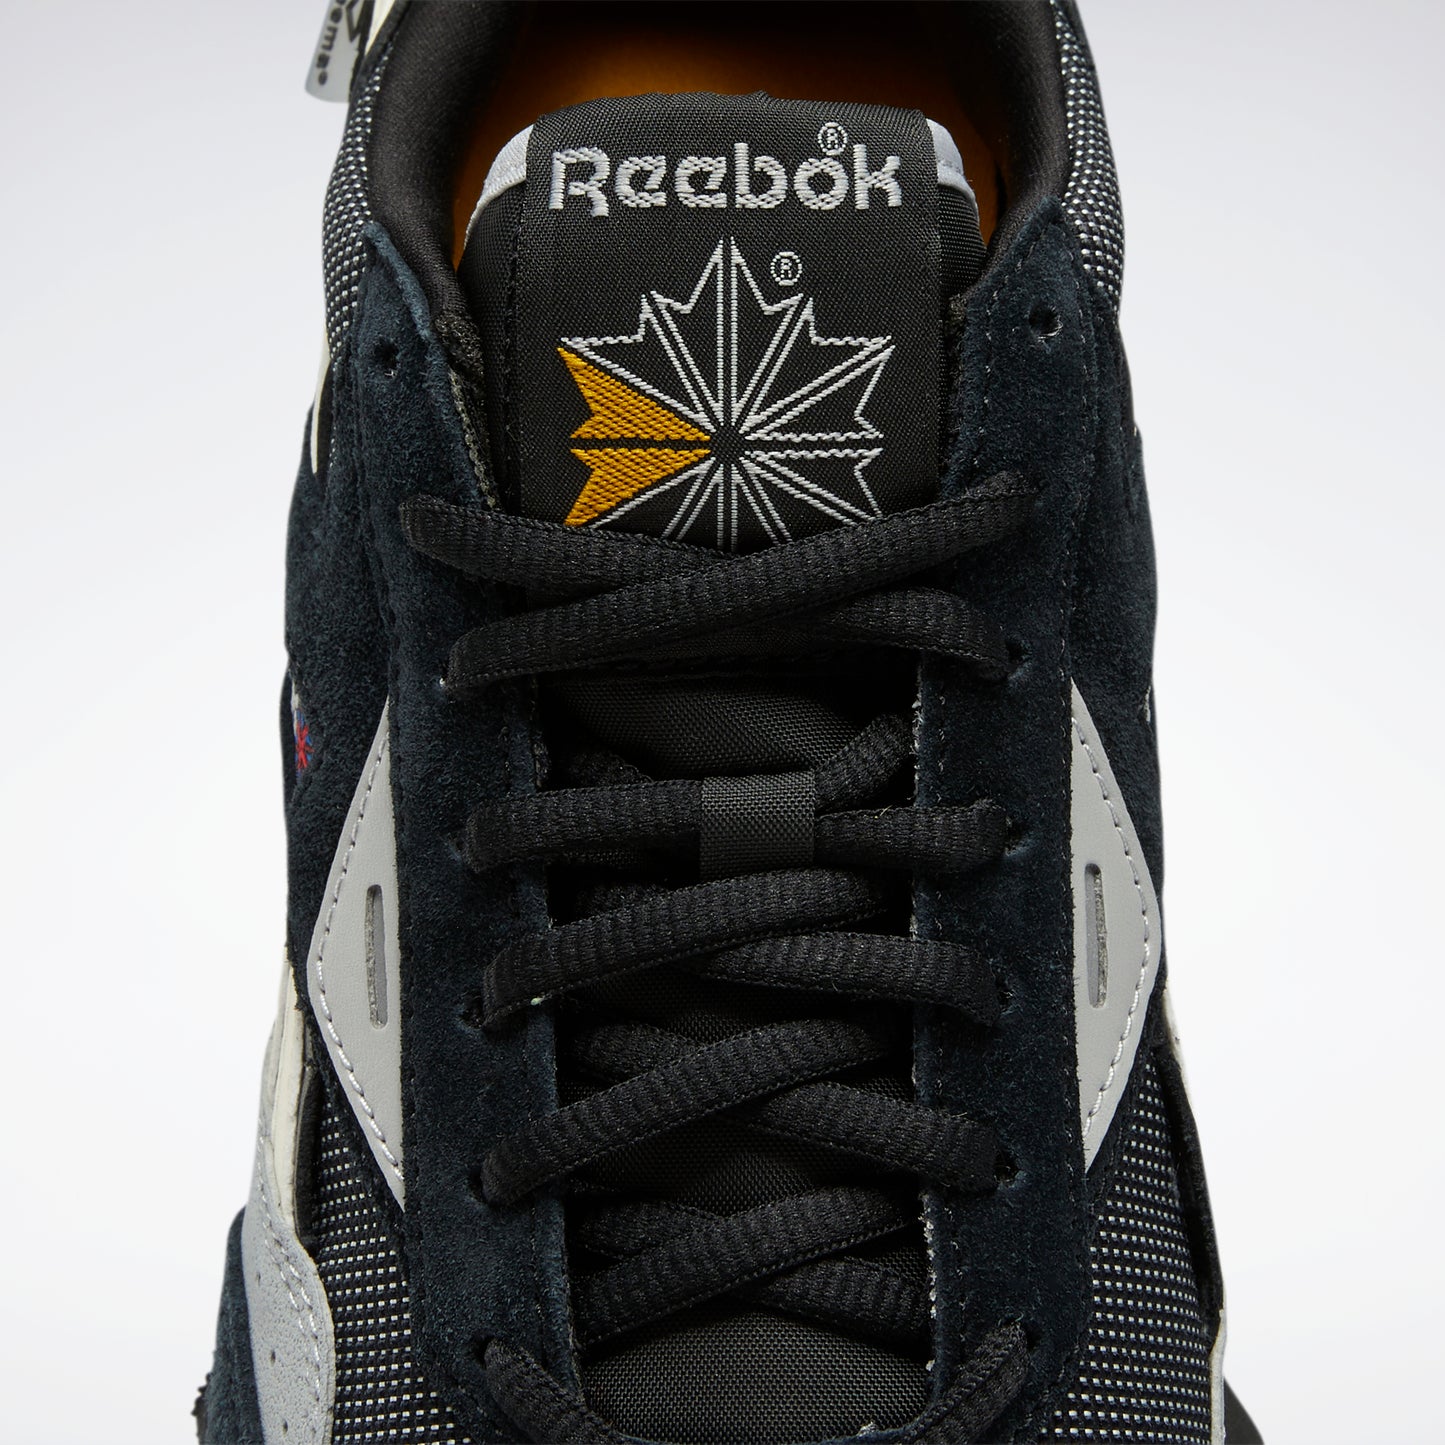 Chaussures Reebok Hommes Lx2200 Chaussures Cblack/Clawht/Pugry3